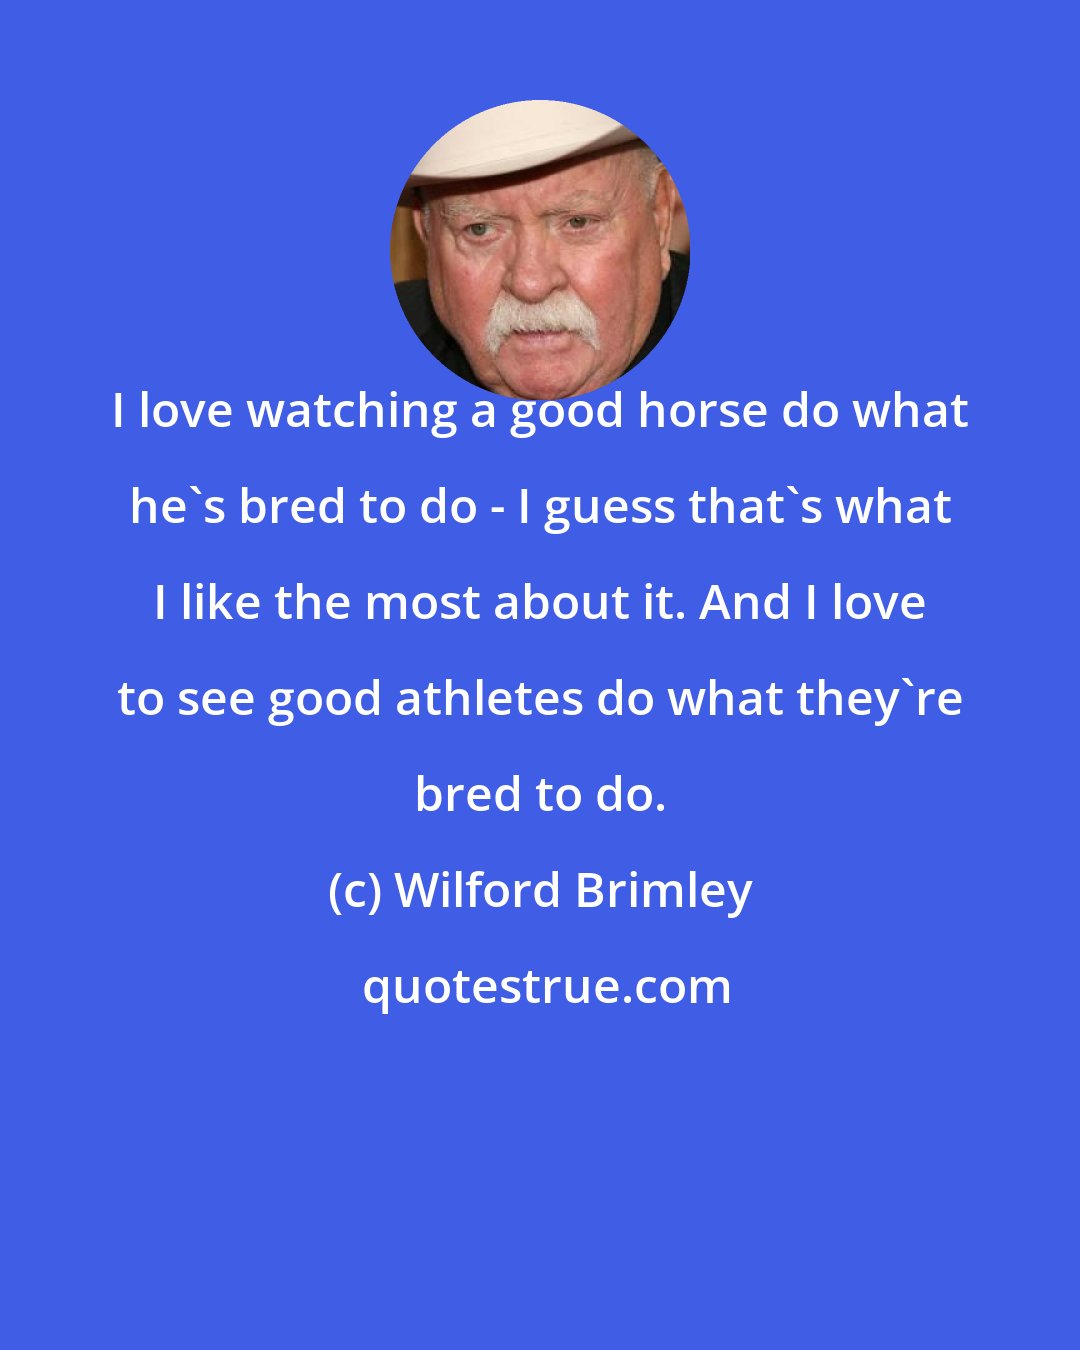 Wilford Brimley: I love watching a good horse do what he's bred to do - I guess that's what I like the most about it. And I love to see good athletes do what they're bred to do.